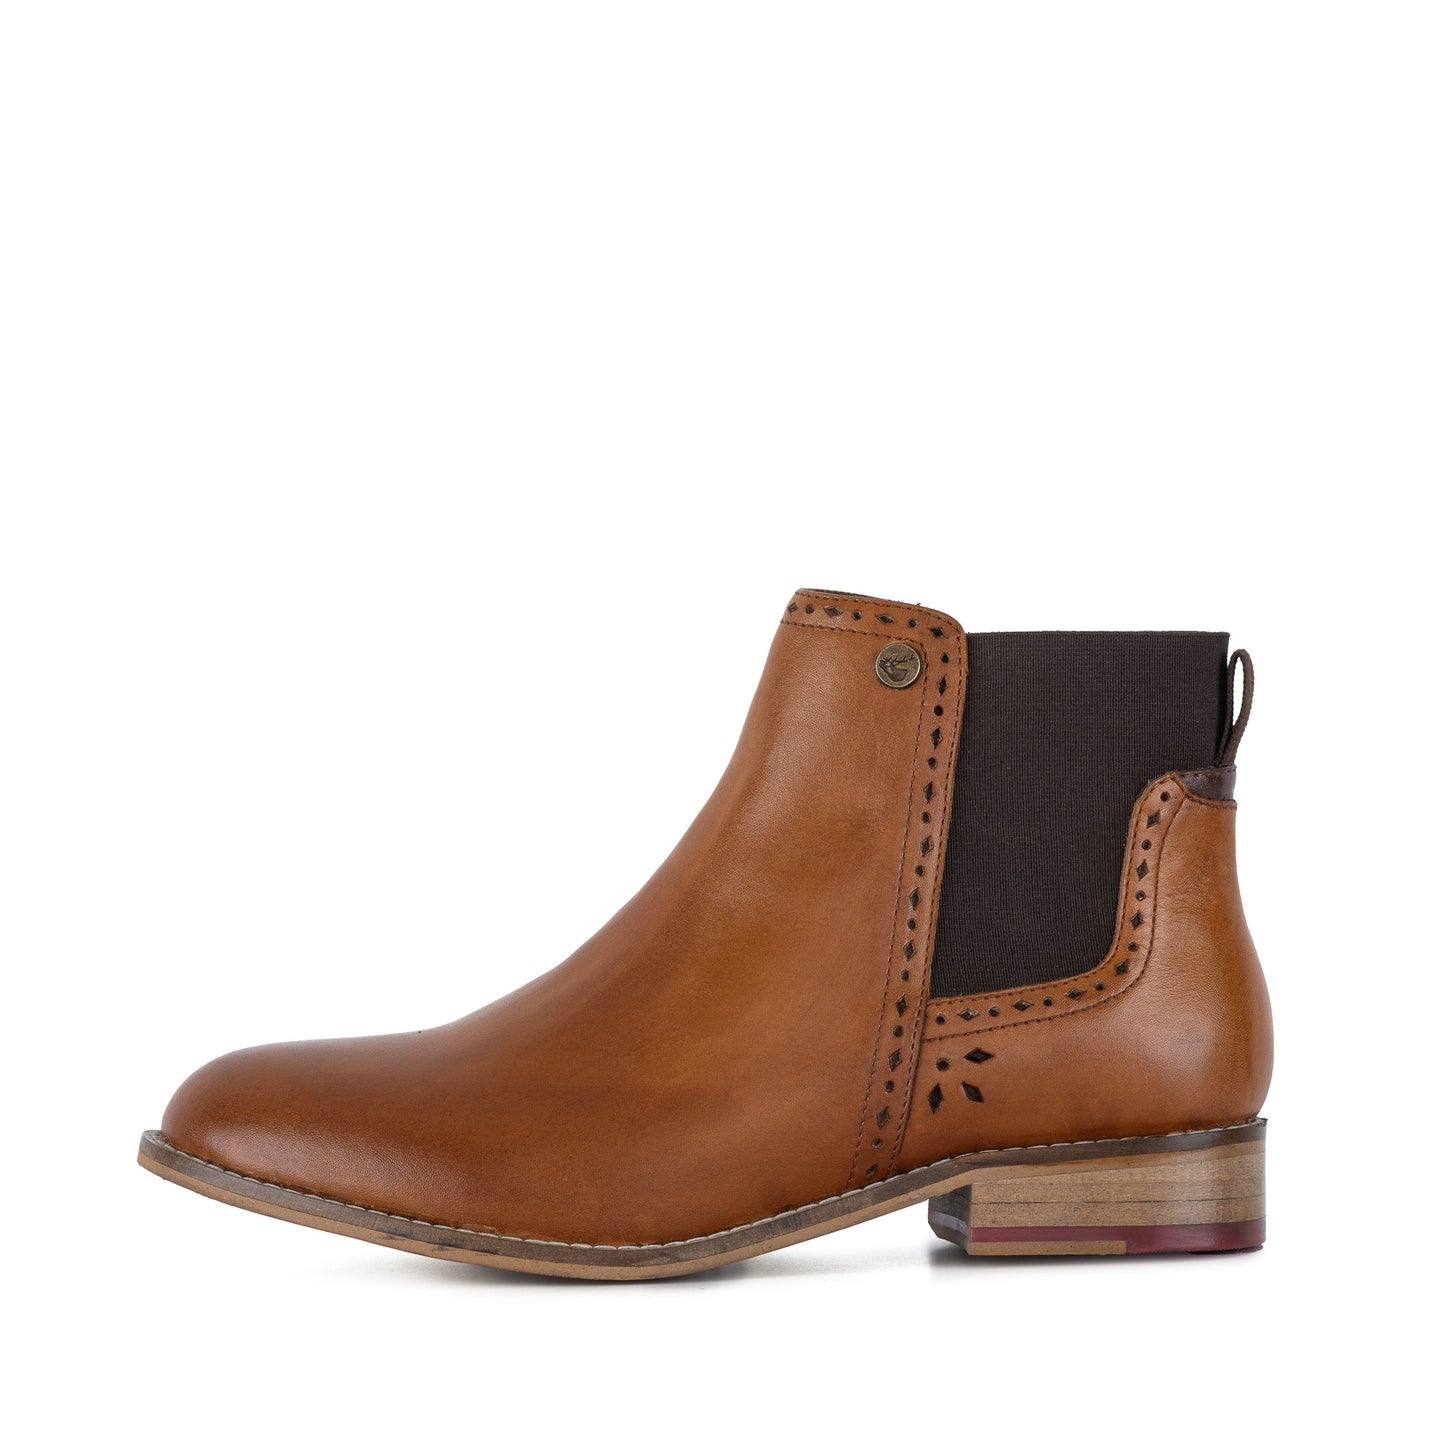 LADIES GS ROBYN TAN CHELSEA BOOT